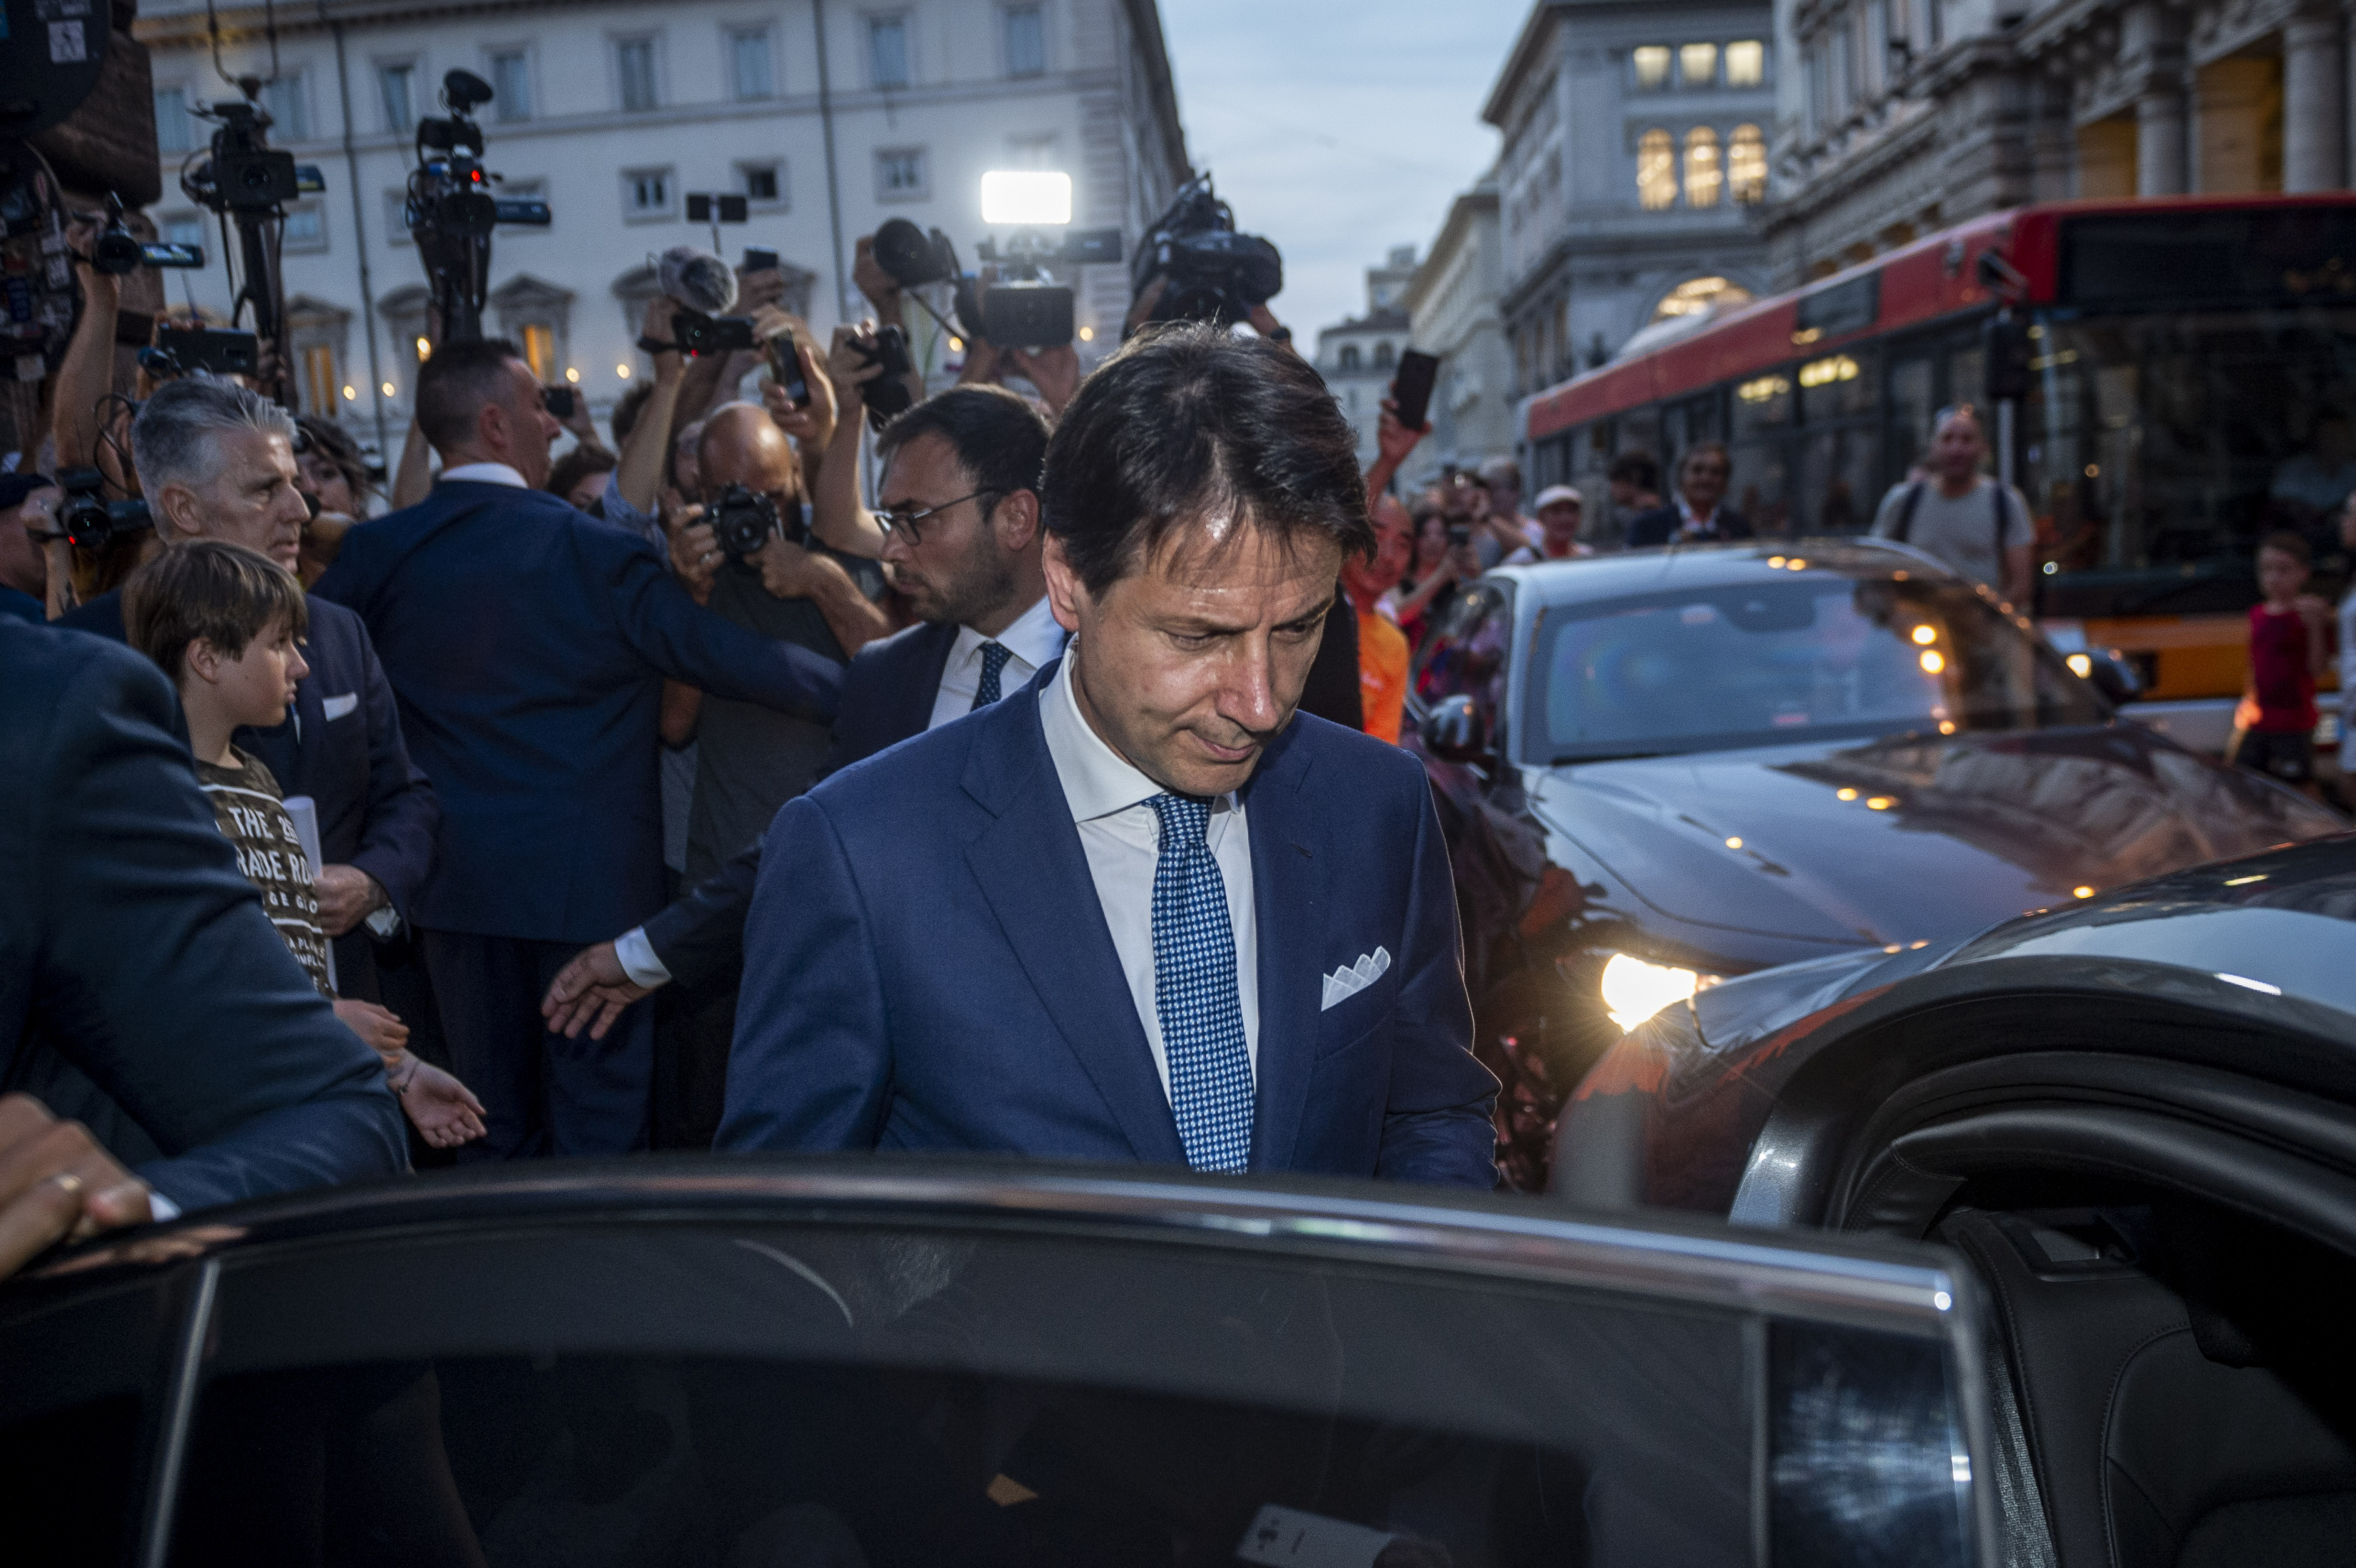 ROME, ITALY- AUGUST 27: Italian Prime Minister Giuseppe Conte leaves from Chigi palace during the consultations days for the formation of the new government, on August 27, 2019 in Rome, Italy